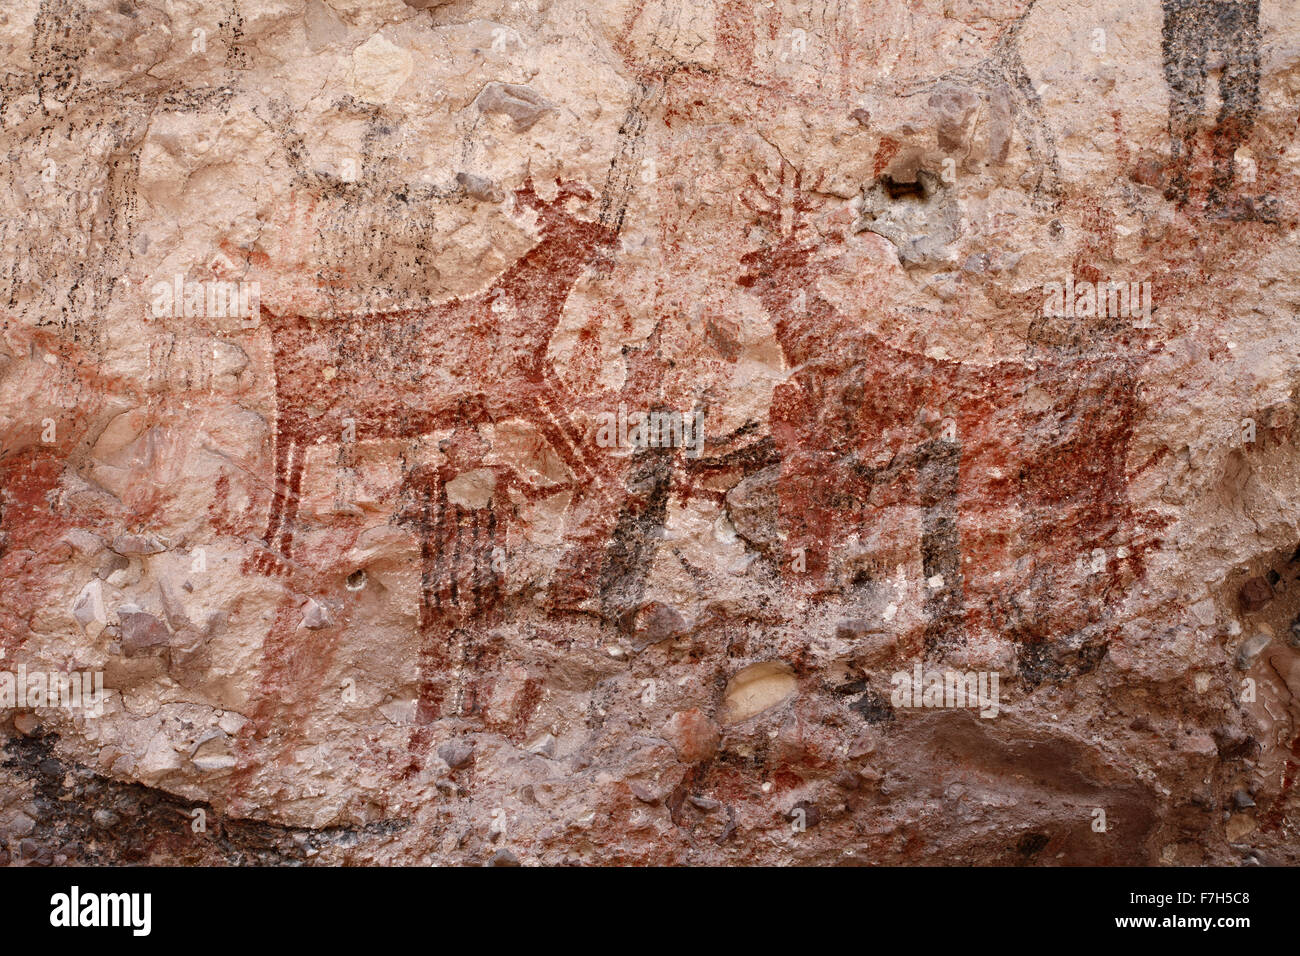 pr7164-D. petroglyphs and rock paintings of Santa Marta, which depict people, animals (deer, rabbits, fish, more). Baja, Mexico. Stock Photo